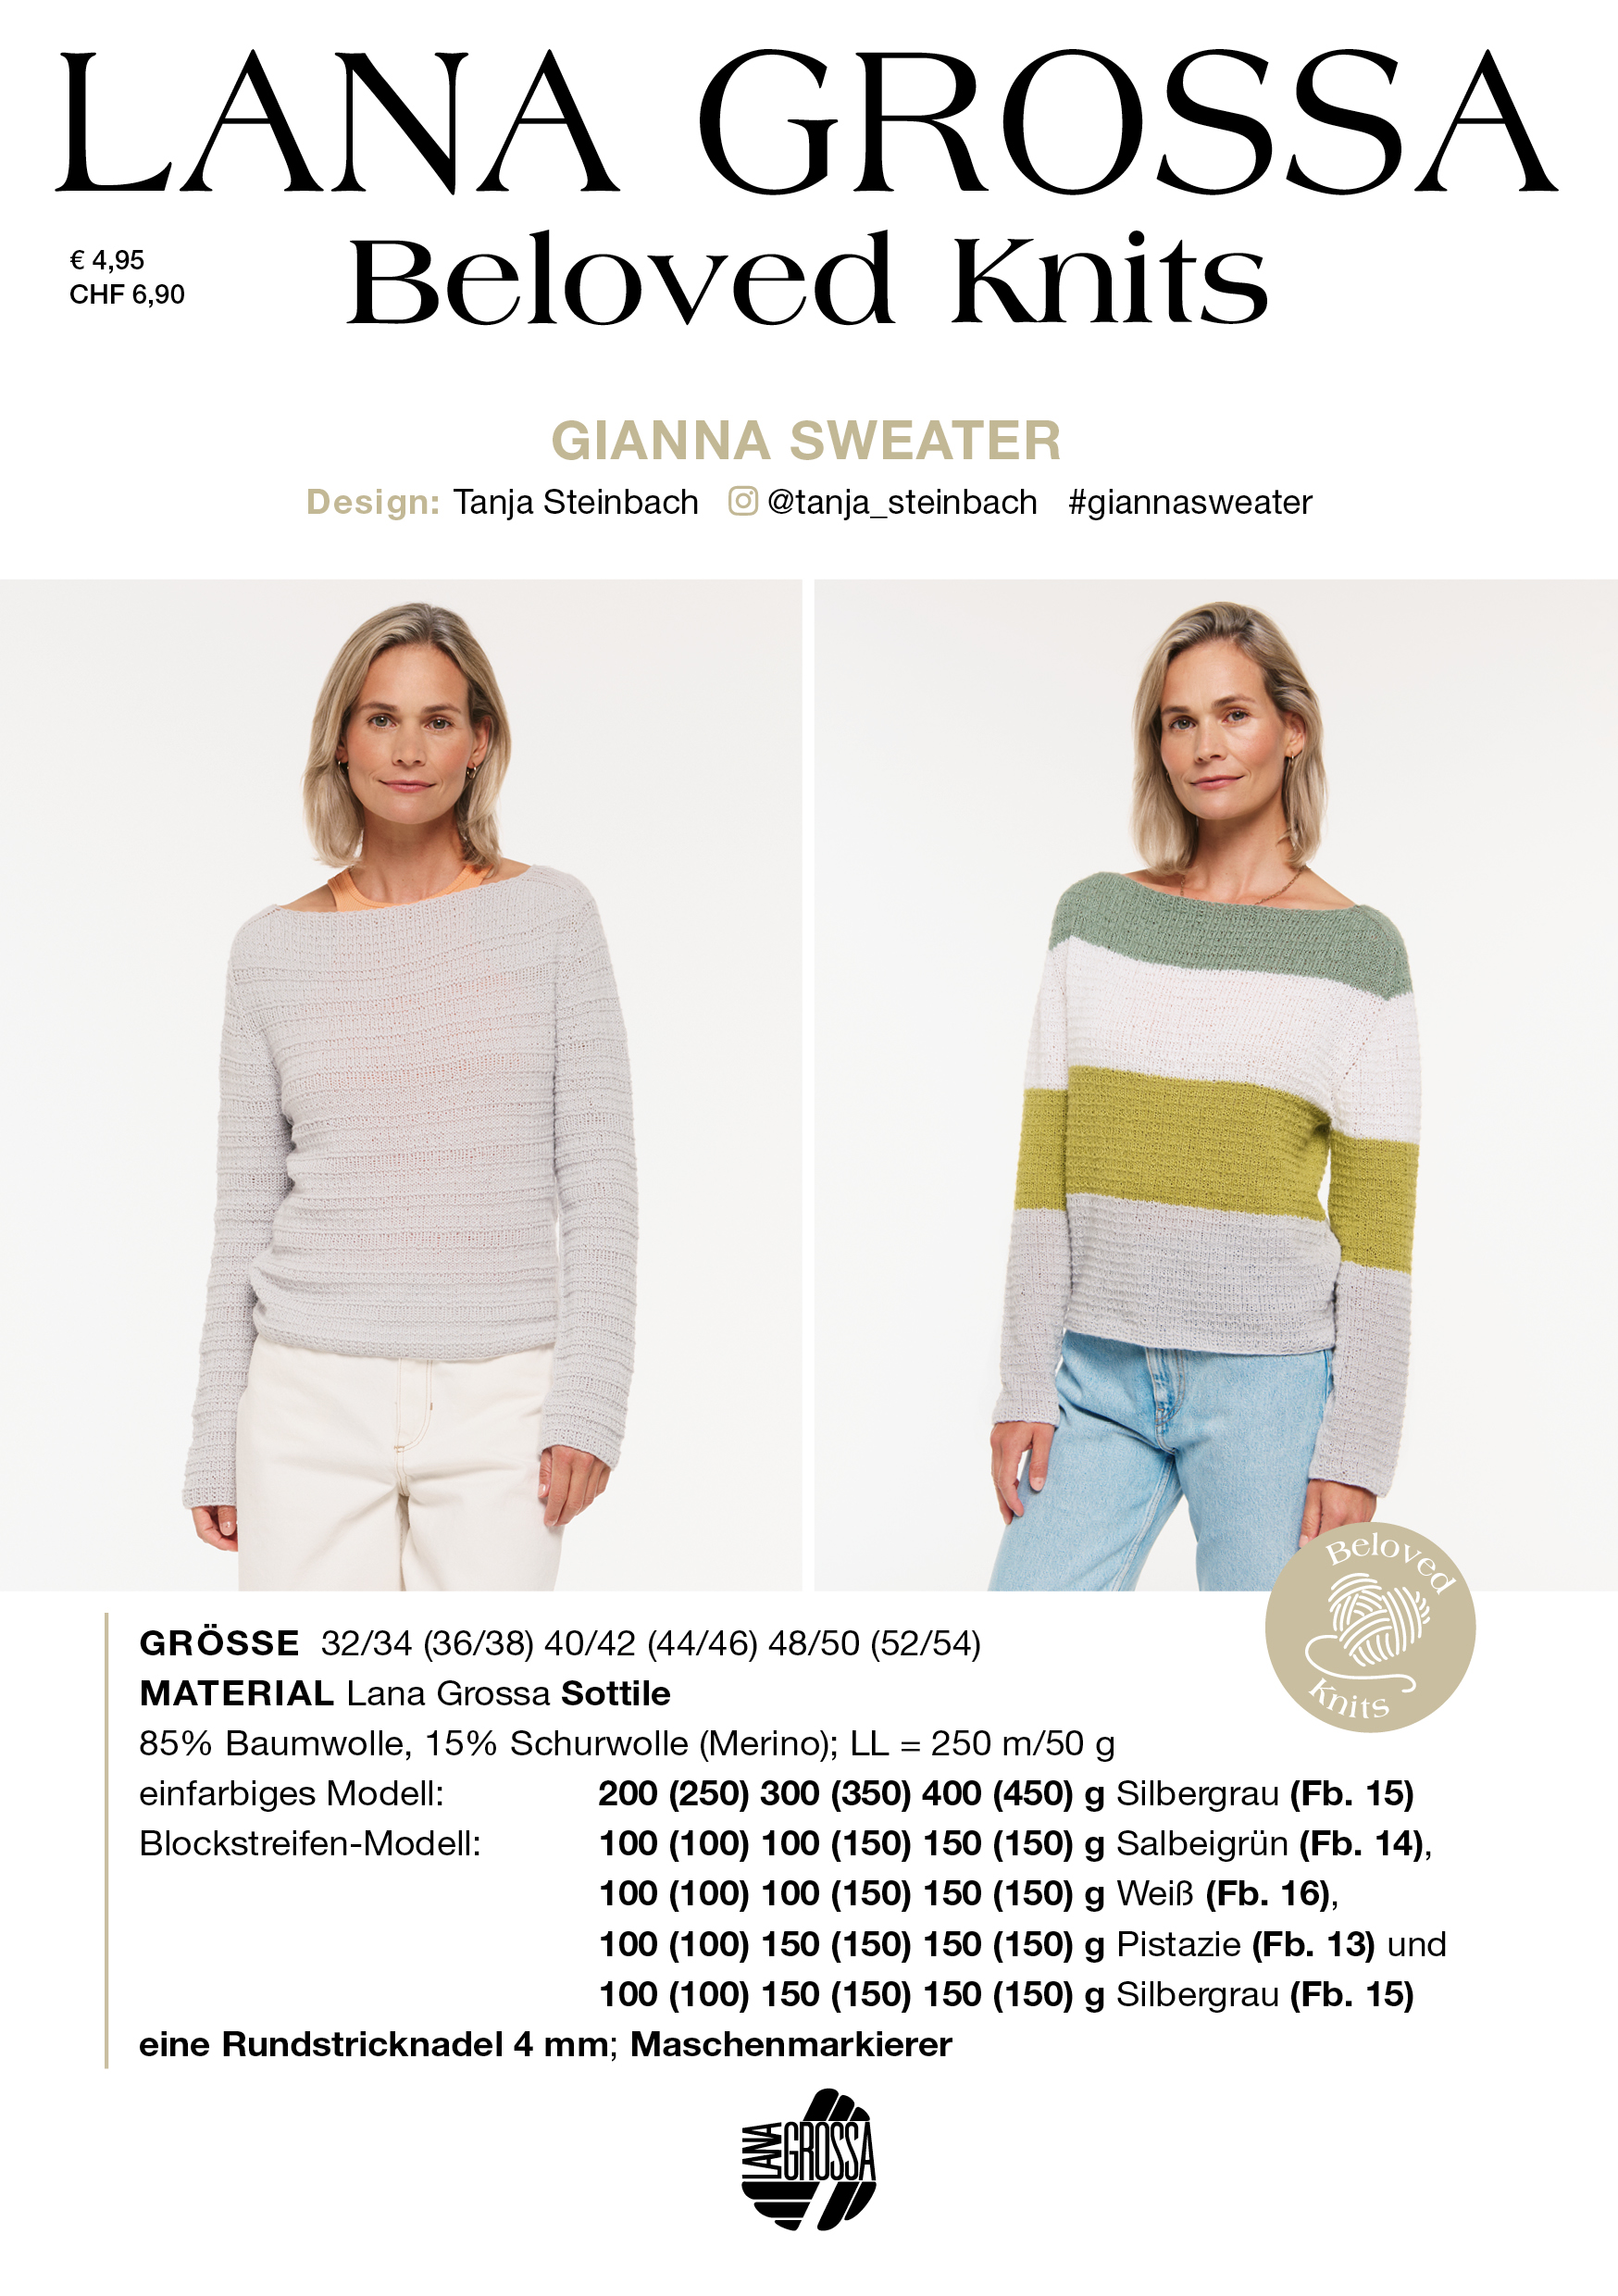 GIANNA SWEATER - BELOVED KNITS NO. 3 - German Edition